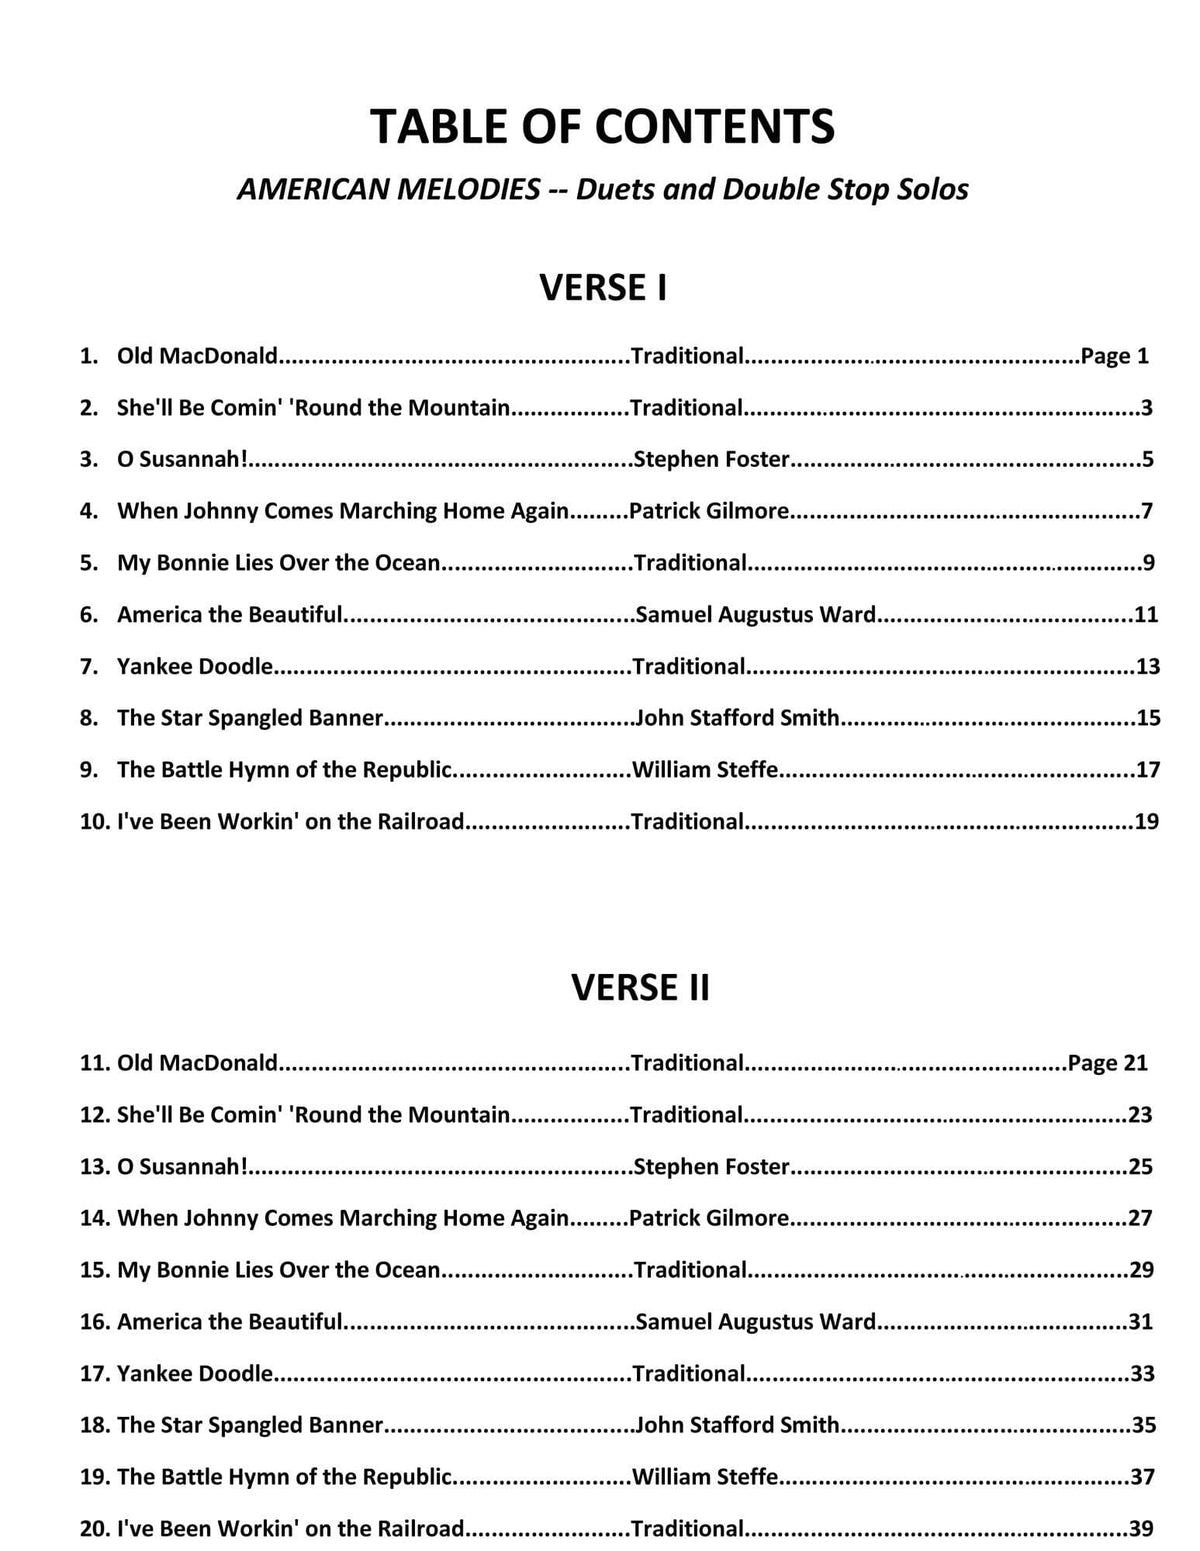 Yasuda, Martha - American Melodies: Double Stop Solos and Duets For Viola, Volume I - Digital Download